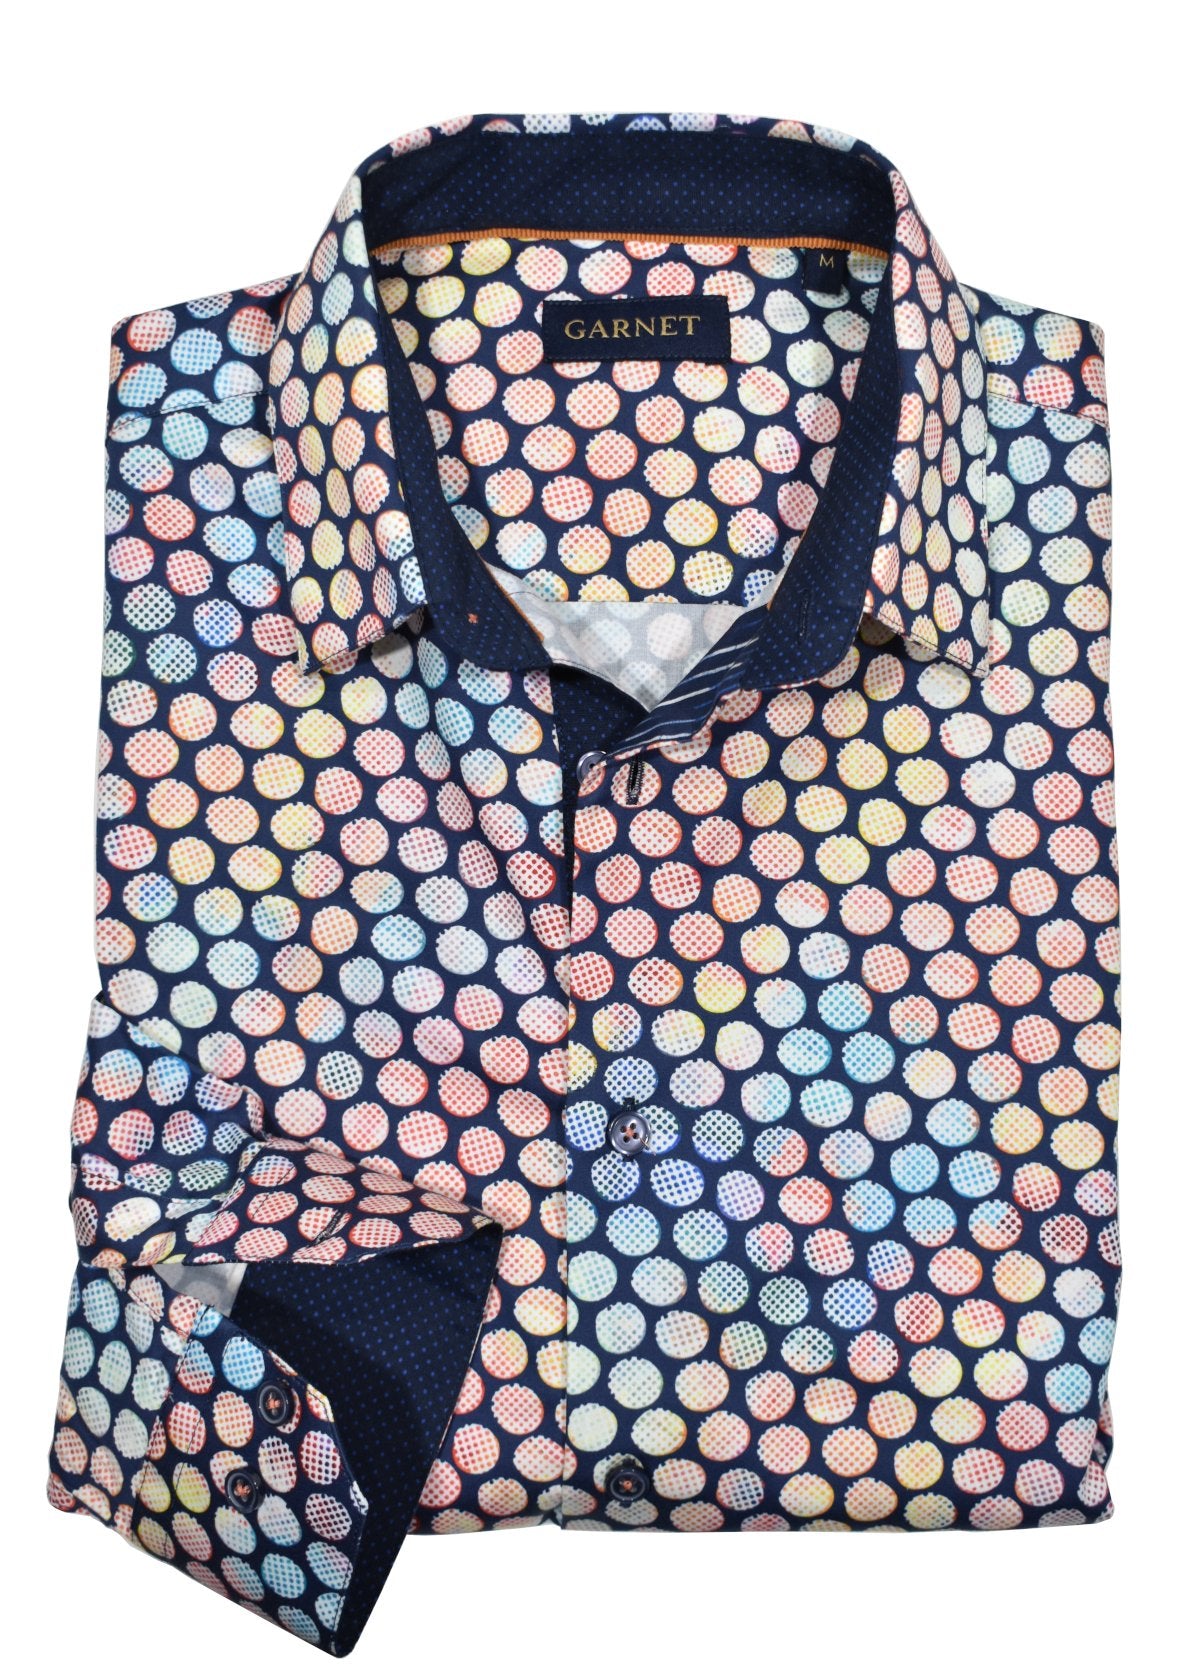 Add style and character to this shirt featuring cotton sateen fabric with an eye-catching circular geometric pattern in vibrant colours. Contrast trim fabrics and taping finish off this stylish piece. By Marcello Sport.